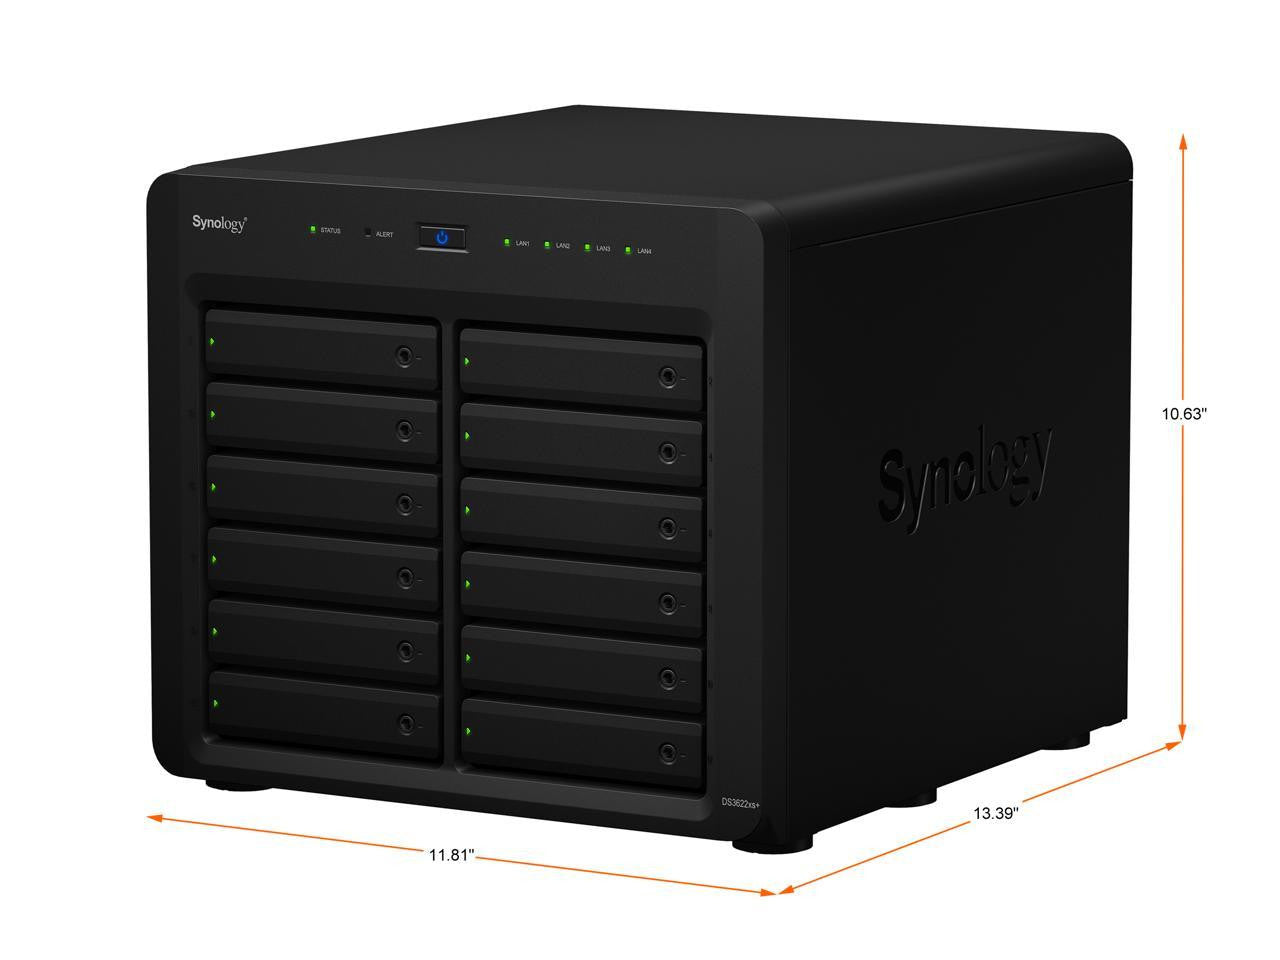 DS3622xs+ 12-BAY DiskStation with 32GB RAM and 192TB (12 x 16TB) of HAT5300 Synology Enterprise Drives